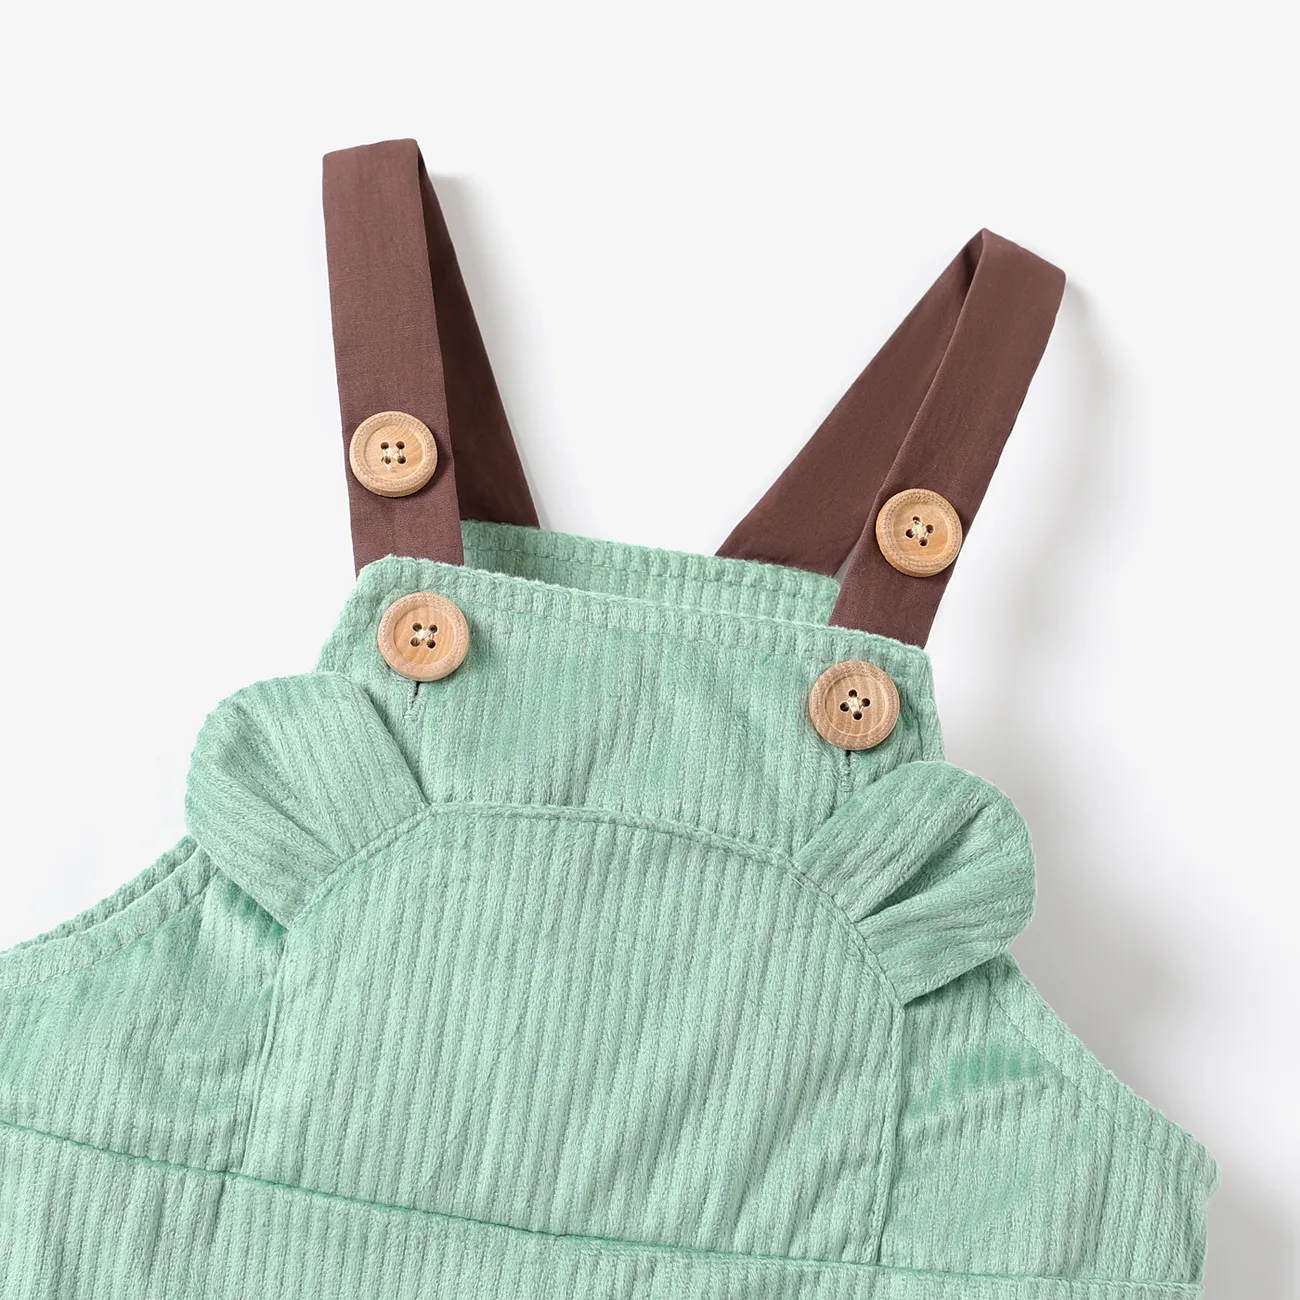 Baby Boy Solid Overalls Green big image 1